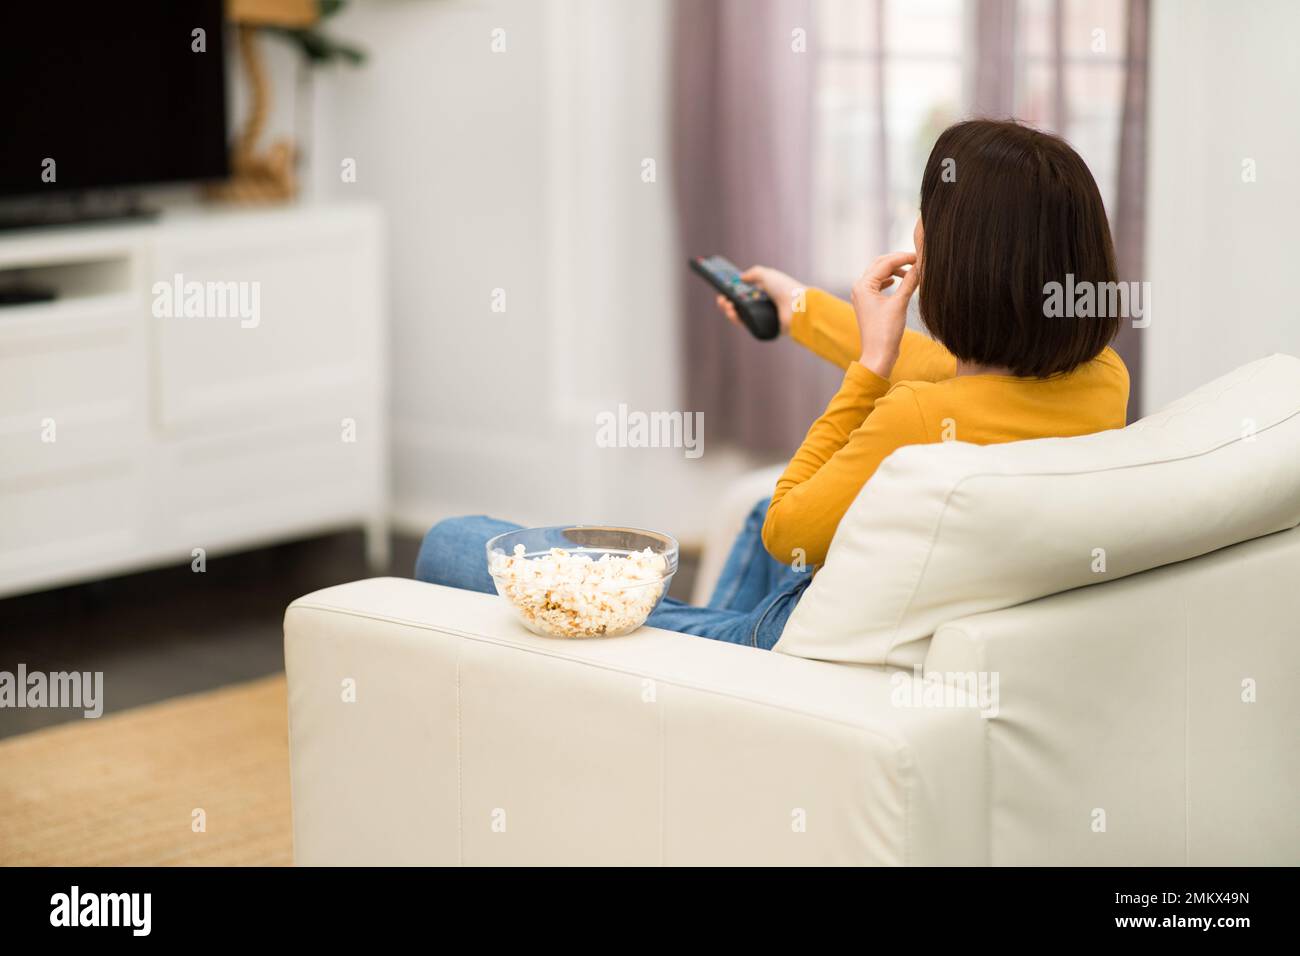 Rear view of woman watching TV with popcorn at home Stock Photo